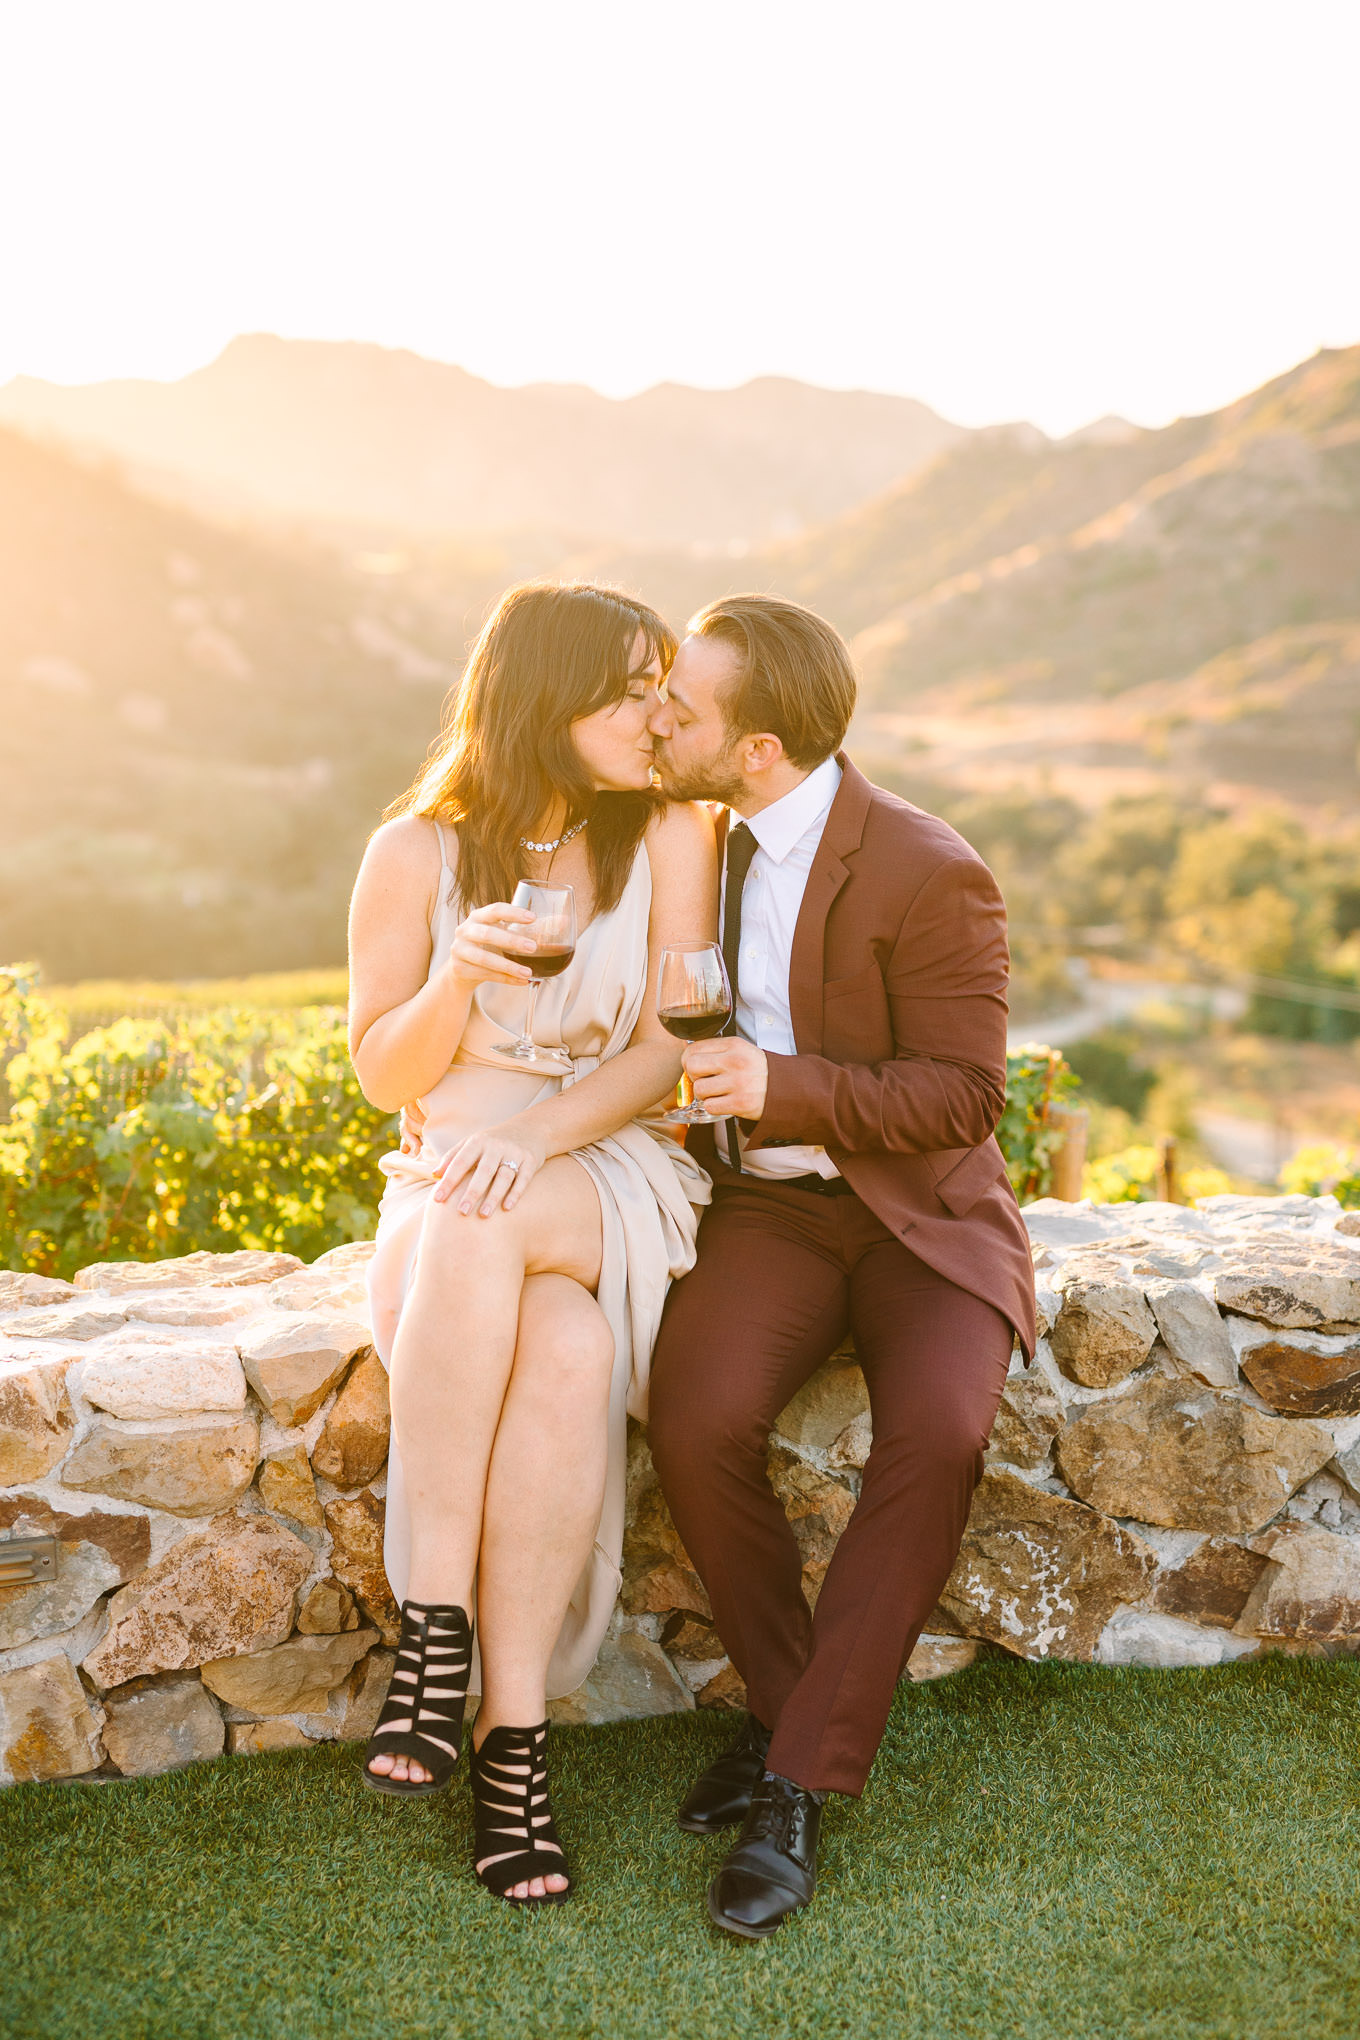 Cielo Farms proposal in Malibu | Wedding and elopement photography roundup | Los Angeles and Palm Springs  photographer | #losangeleswedding #palmspringswedding #elopementphotographer

Source: Mary Costa Photography | Los Angeles